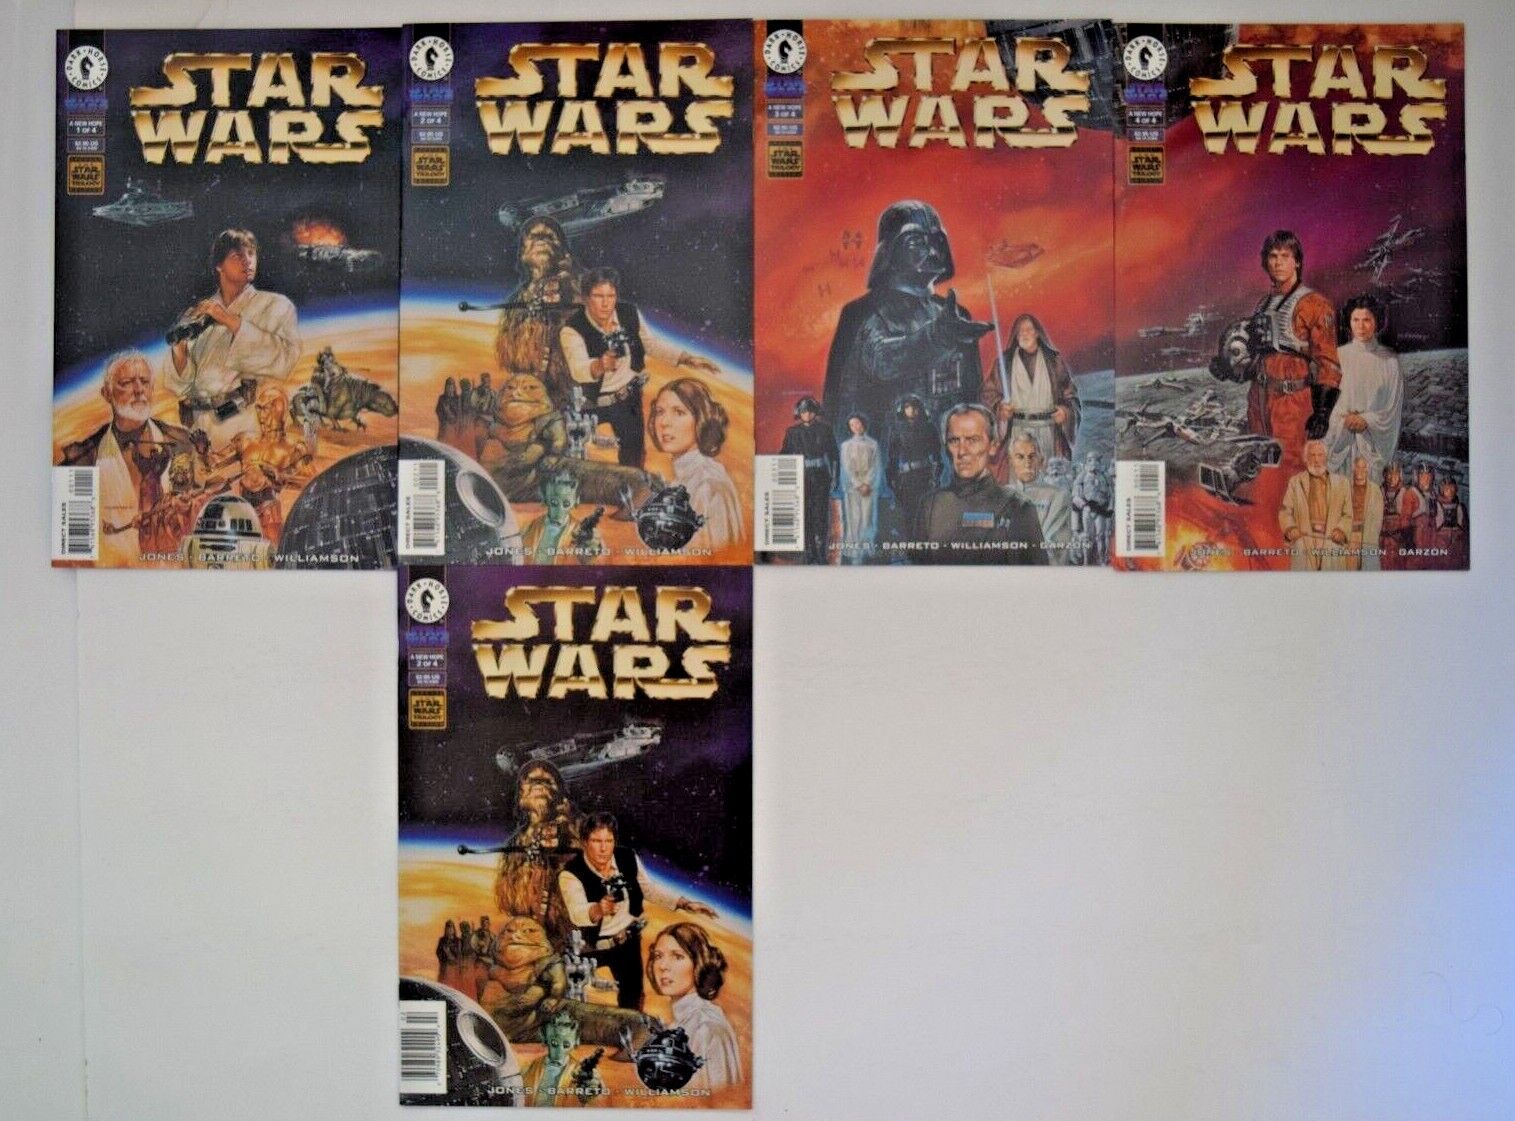 STAR WARS A NEW HOPE SPECIAL (1997) 4 ISSUE SET 1-4 & NEWSSTAND ED #2 COMICS